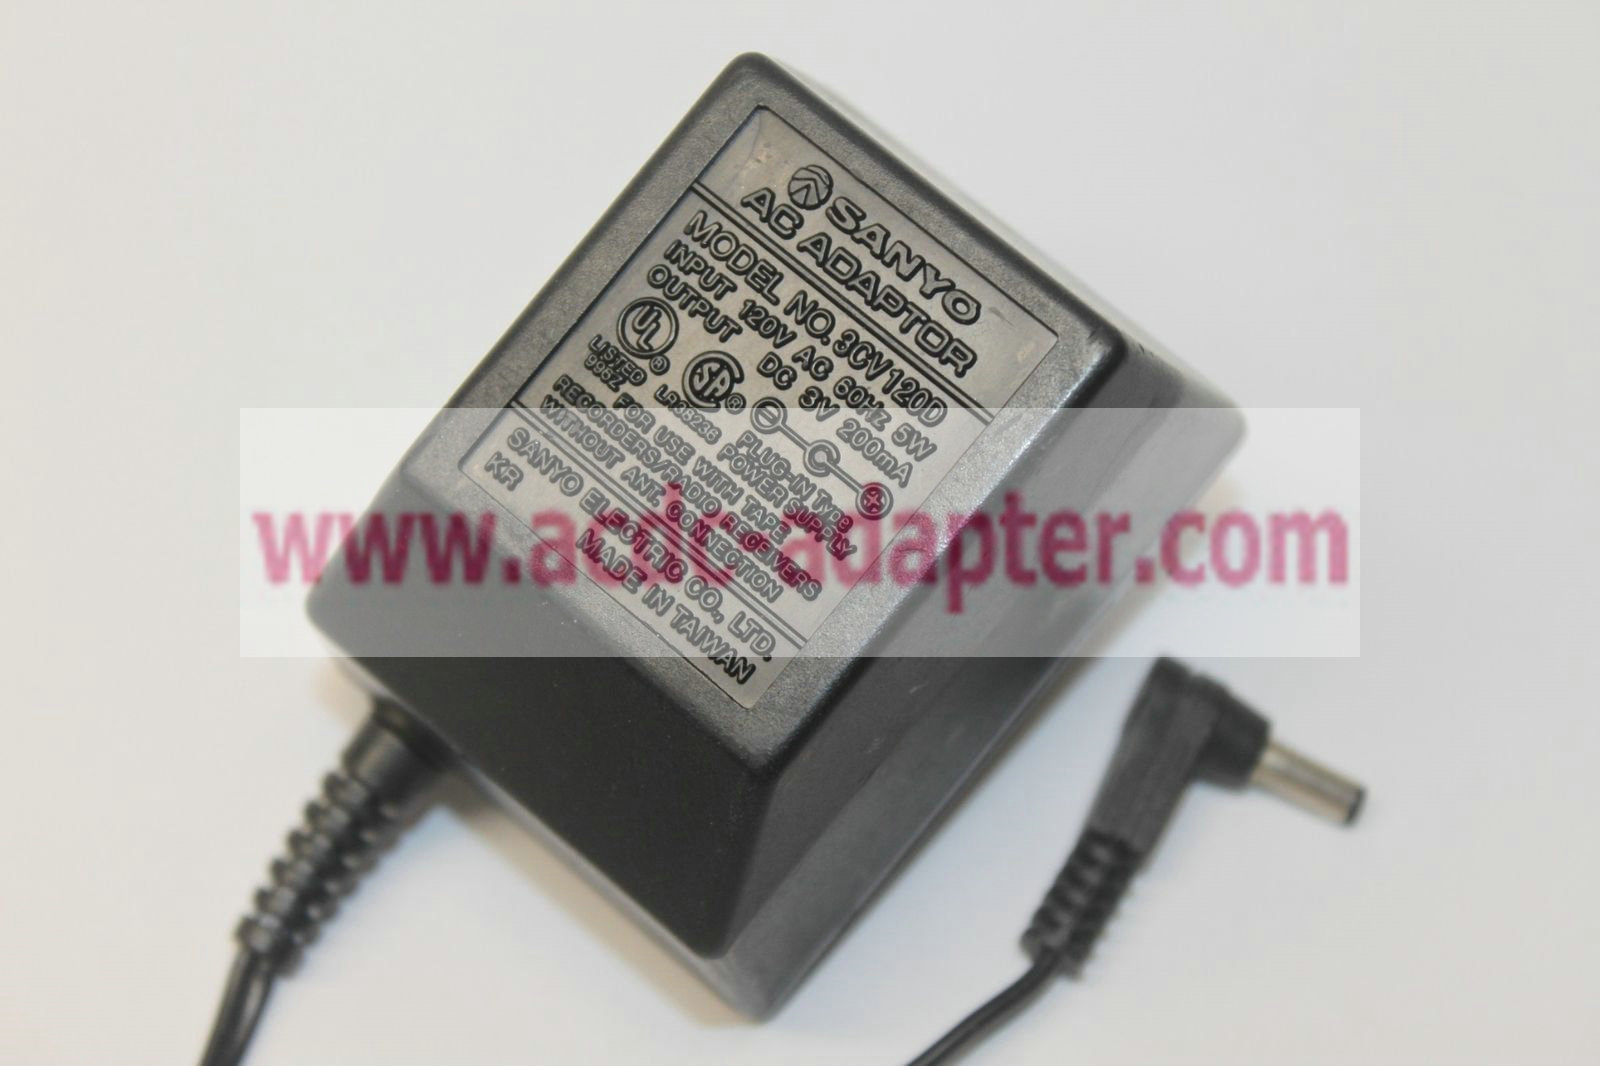 New Sanyo 3CV120D DC 3V 200mA Power Supply AC Adapter for Tape Recorder Radio